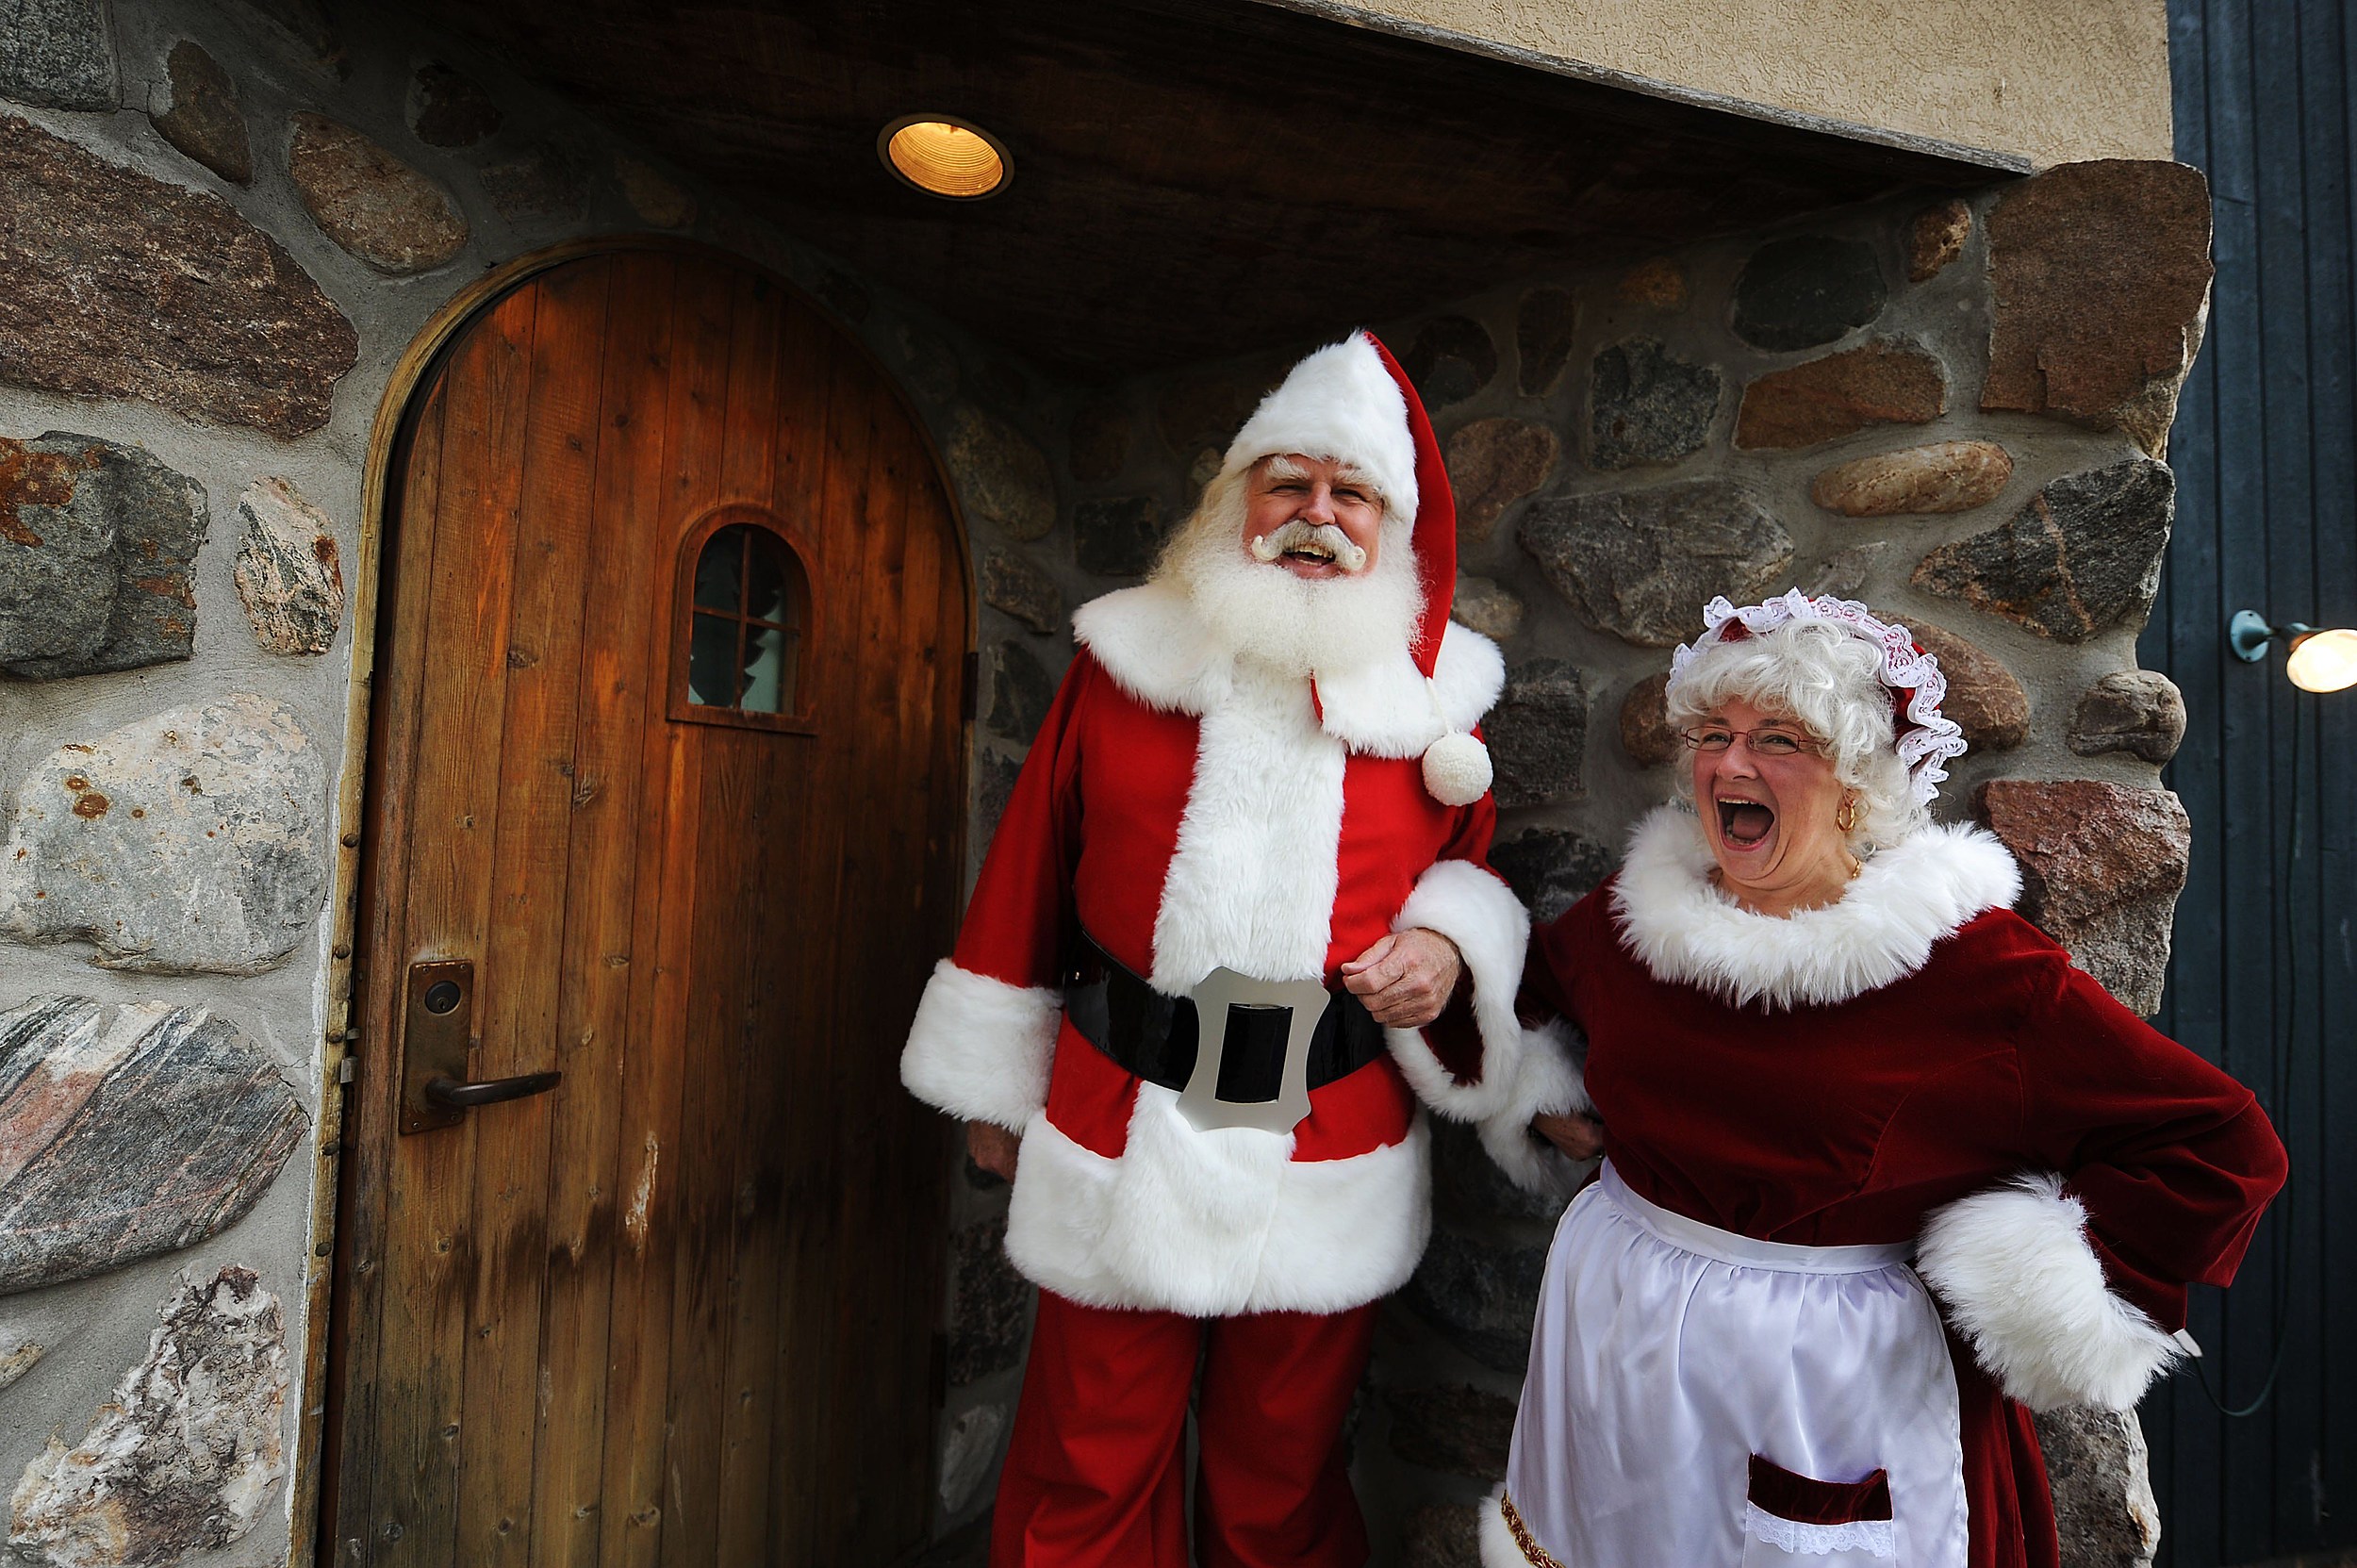 Santa Set To Visit The Buffalo Zoo To Have Breakfast With Kids